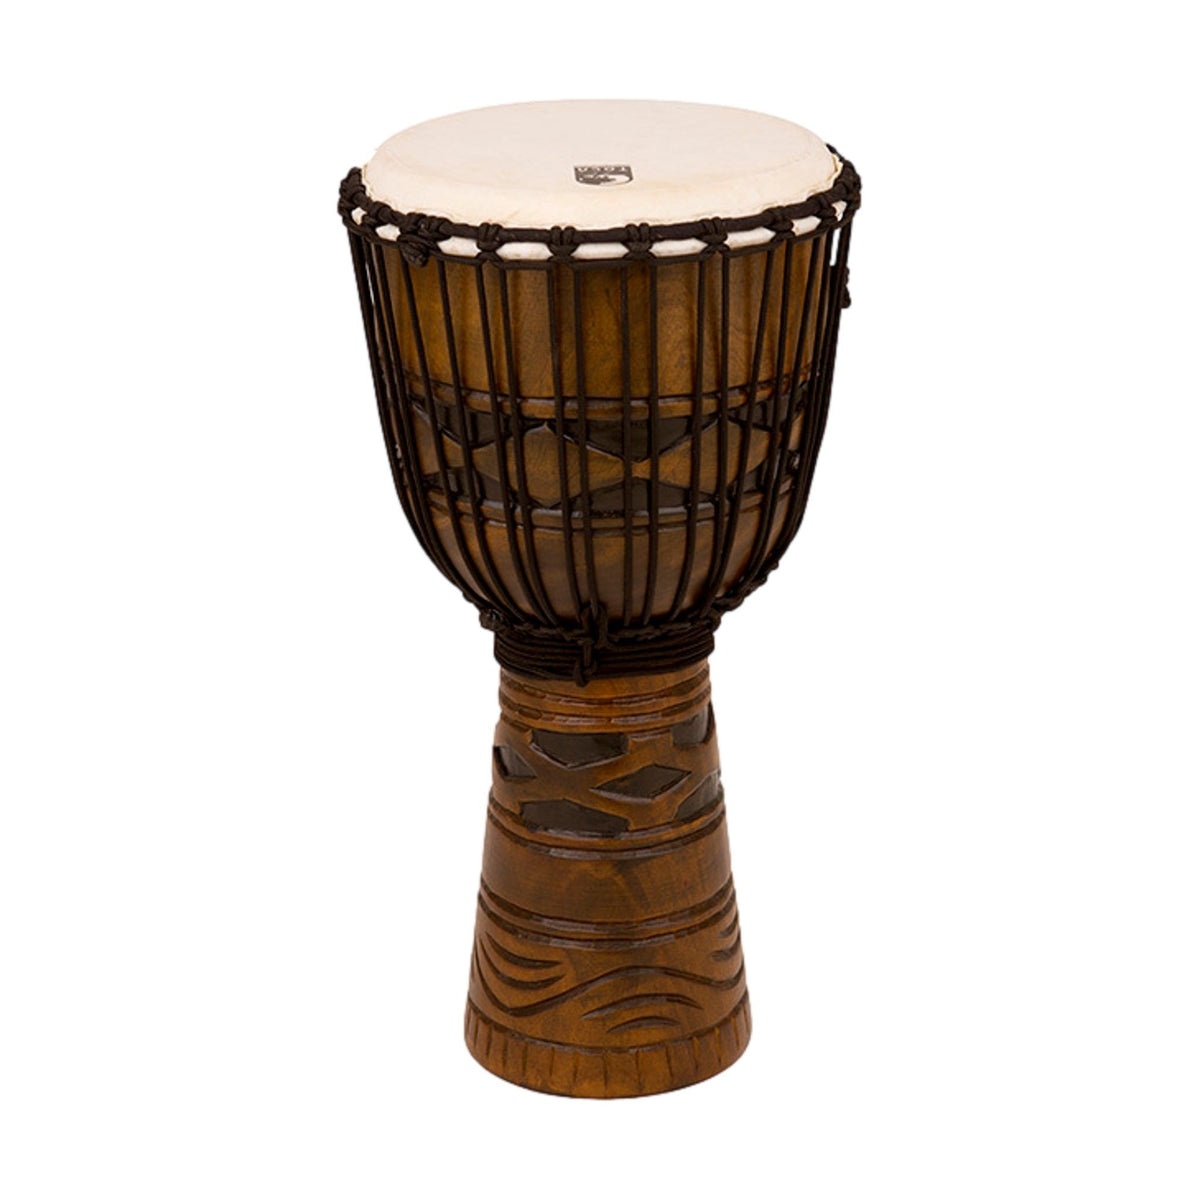 Toca Wooden Djembe 12in African Mask